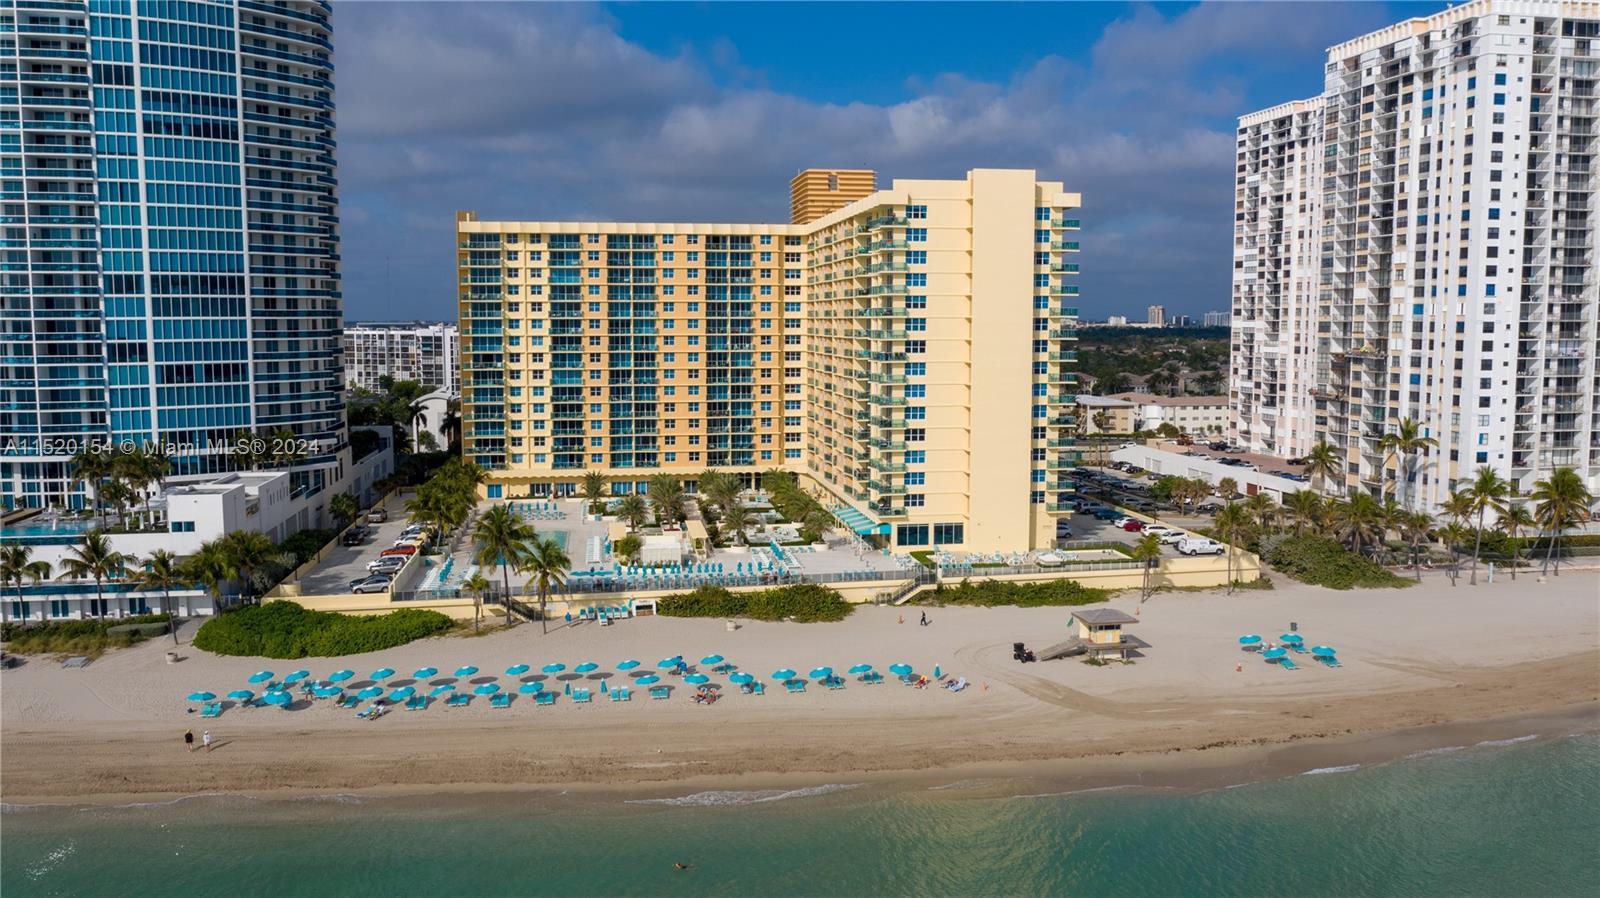 Photo of 2501 S Ocean Dr #1223 in Hollywood, FL